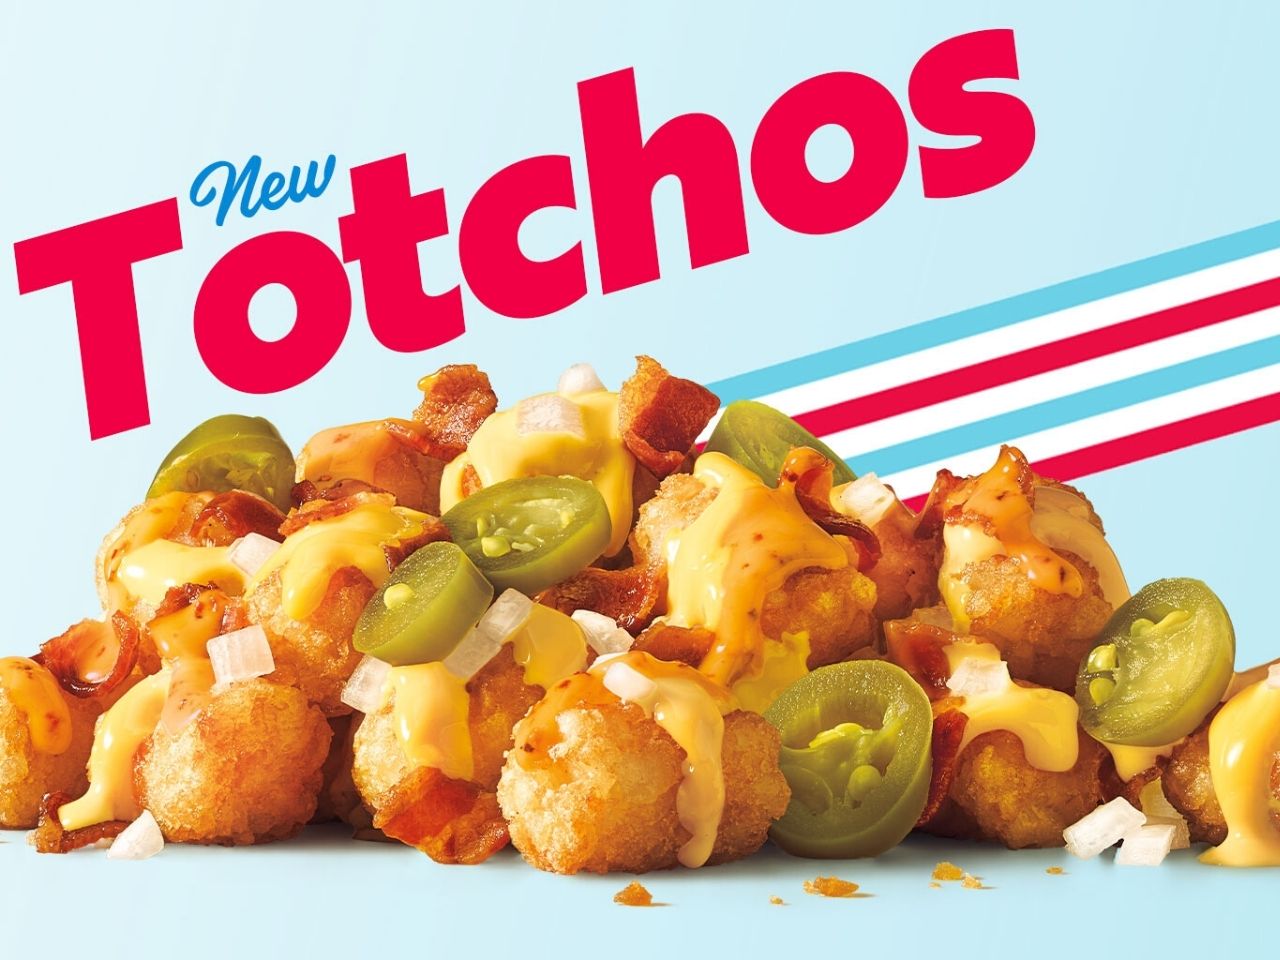 Sonic adds Frito-Lay items to the menu, 2018-11-27